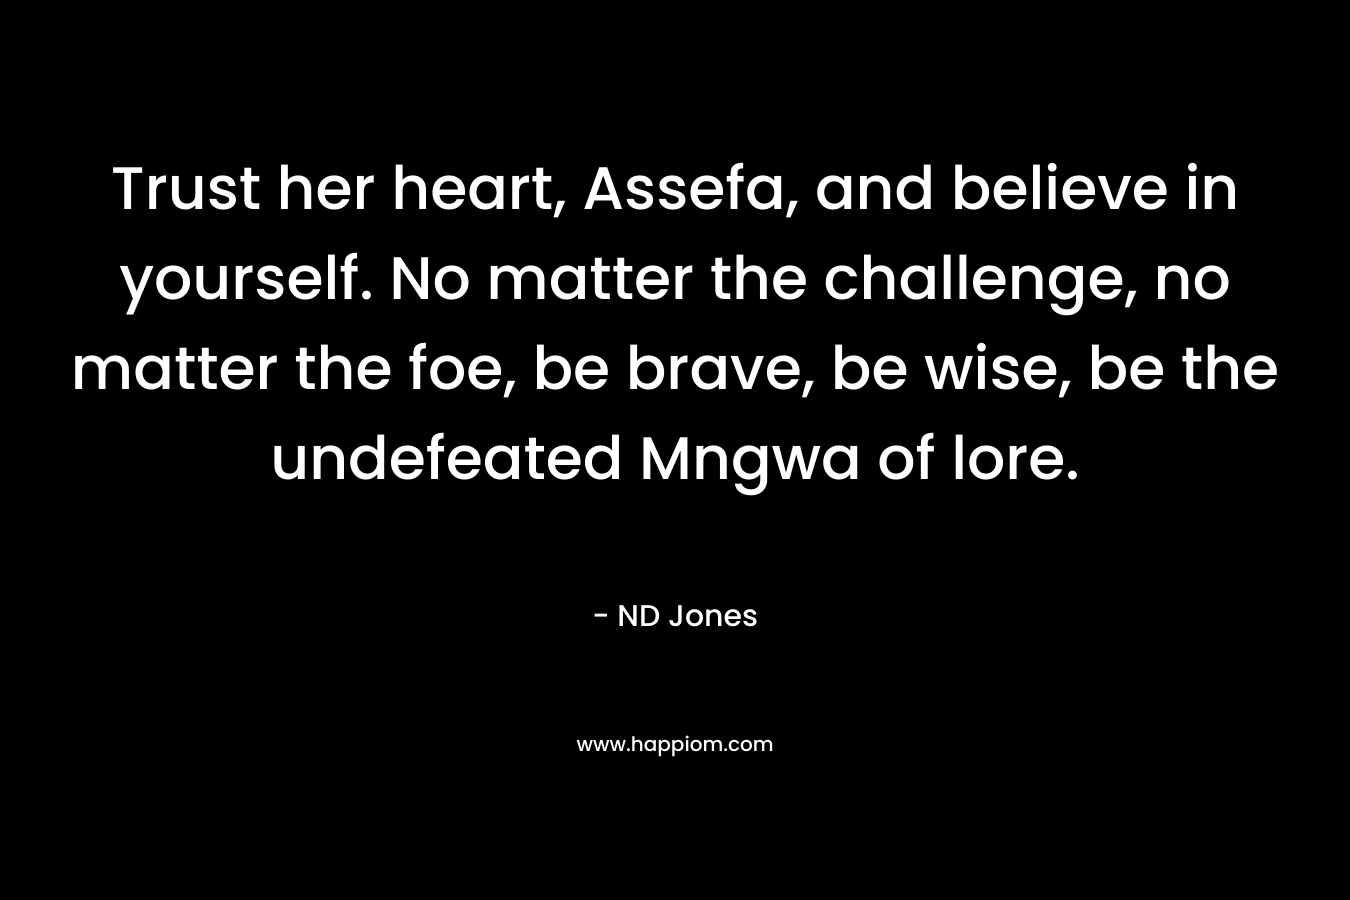 Trust her heart, Assefa, and believe in yourself. No matter the challenge, no matter the foe, be brave, be wise, be the undefeated Mngwa of lore. – ND Jones